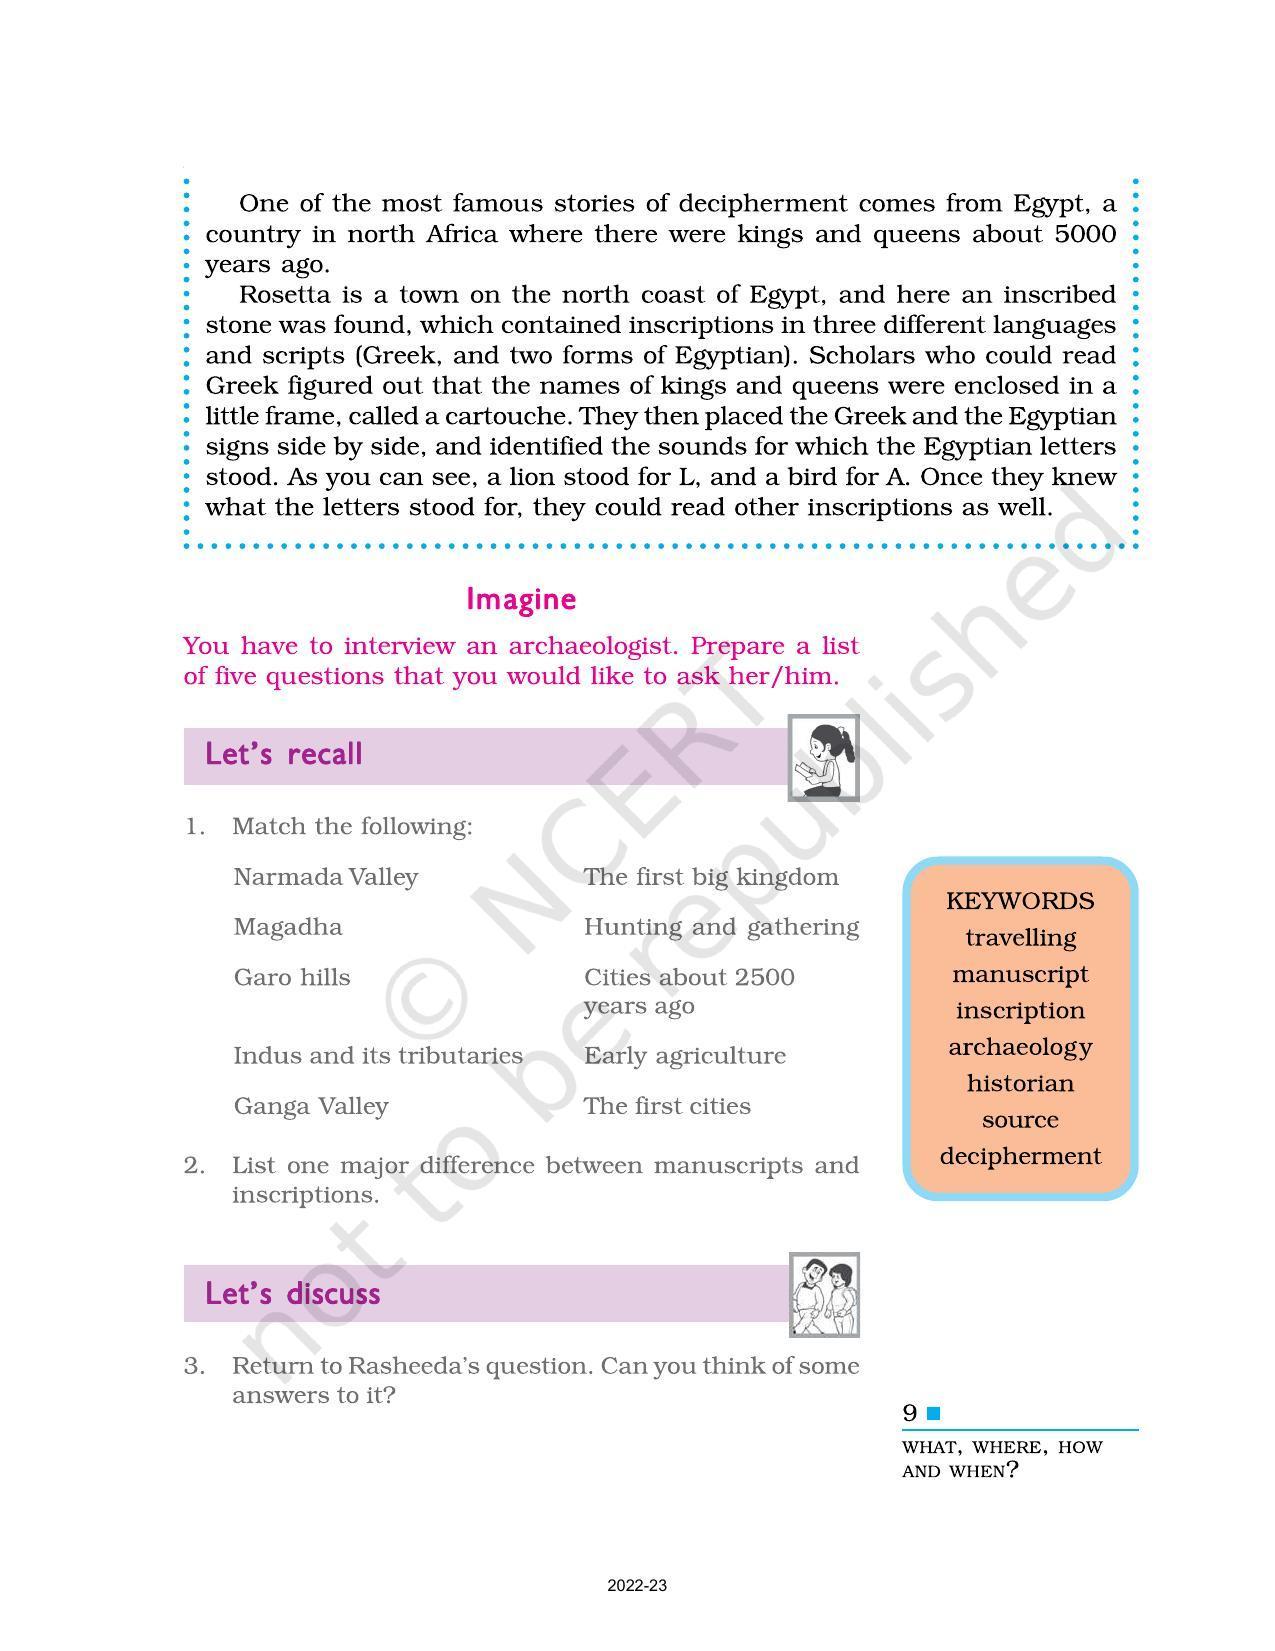 NCERT Book for Class 6 History (Social Science) : Chapter 1-What Where, How, and When? - Page 9